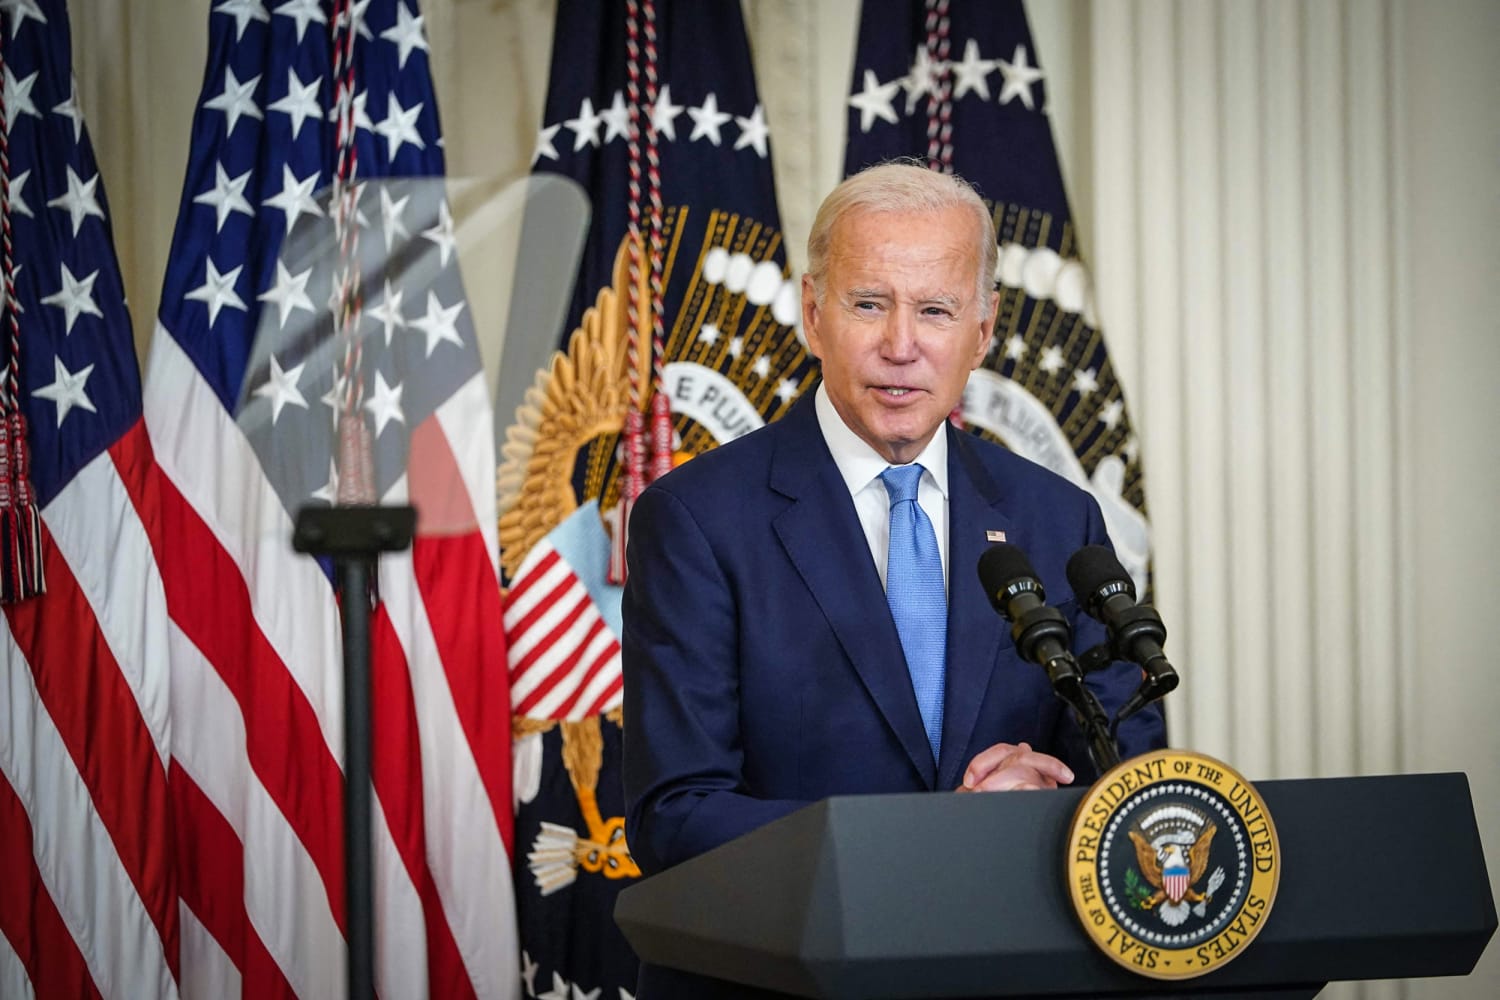 Biden to tout next steps on 'Cancer Moonshot' in speech at JFK library